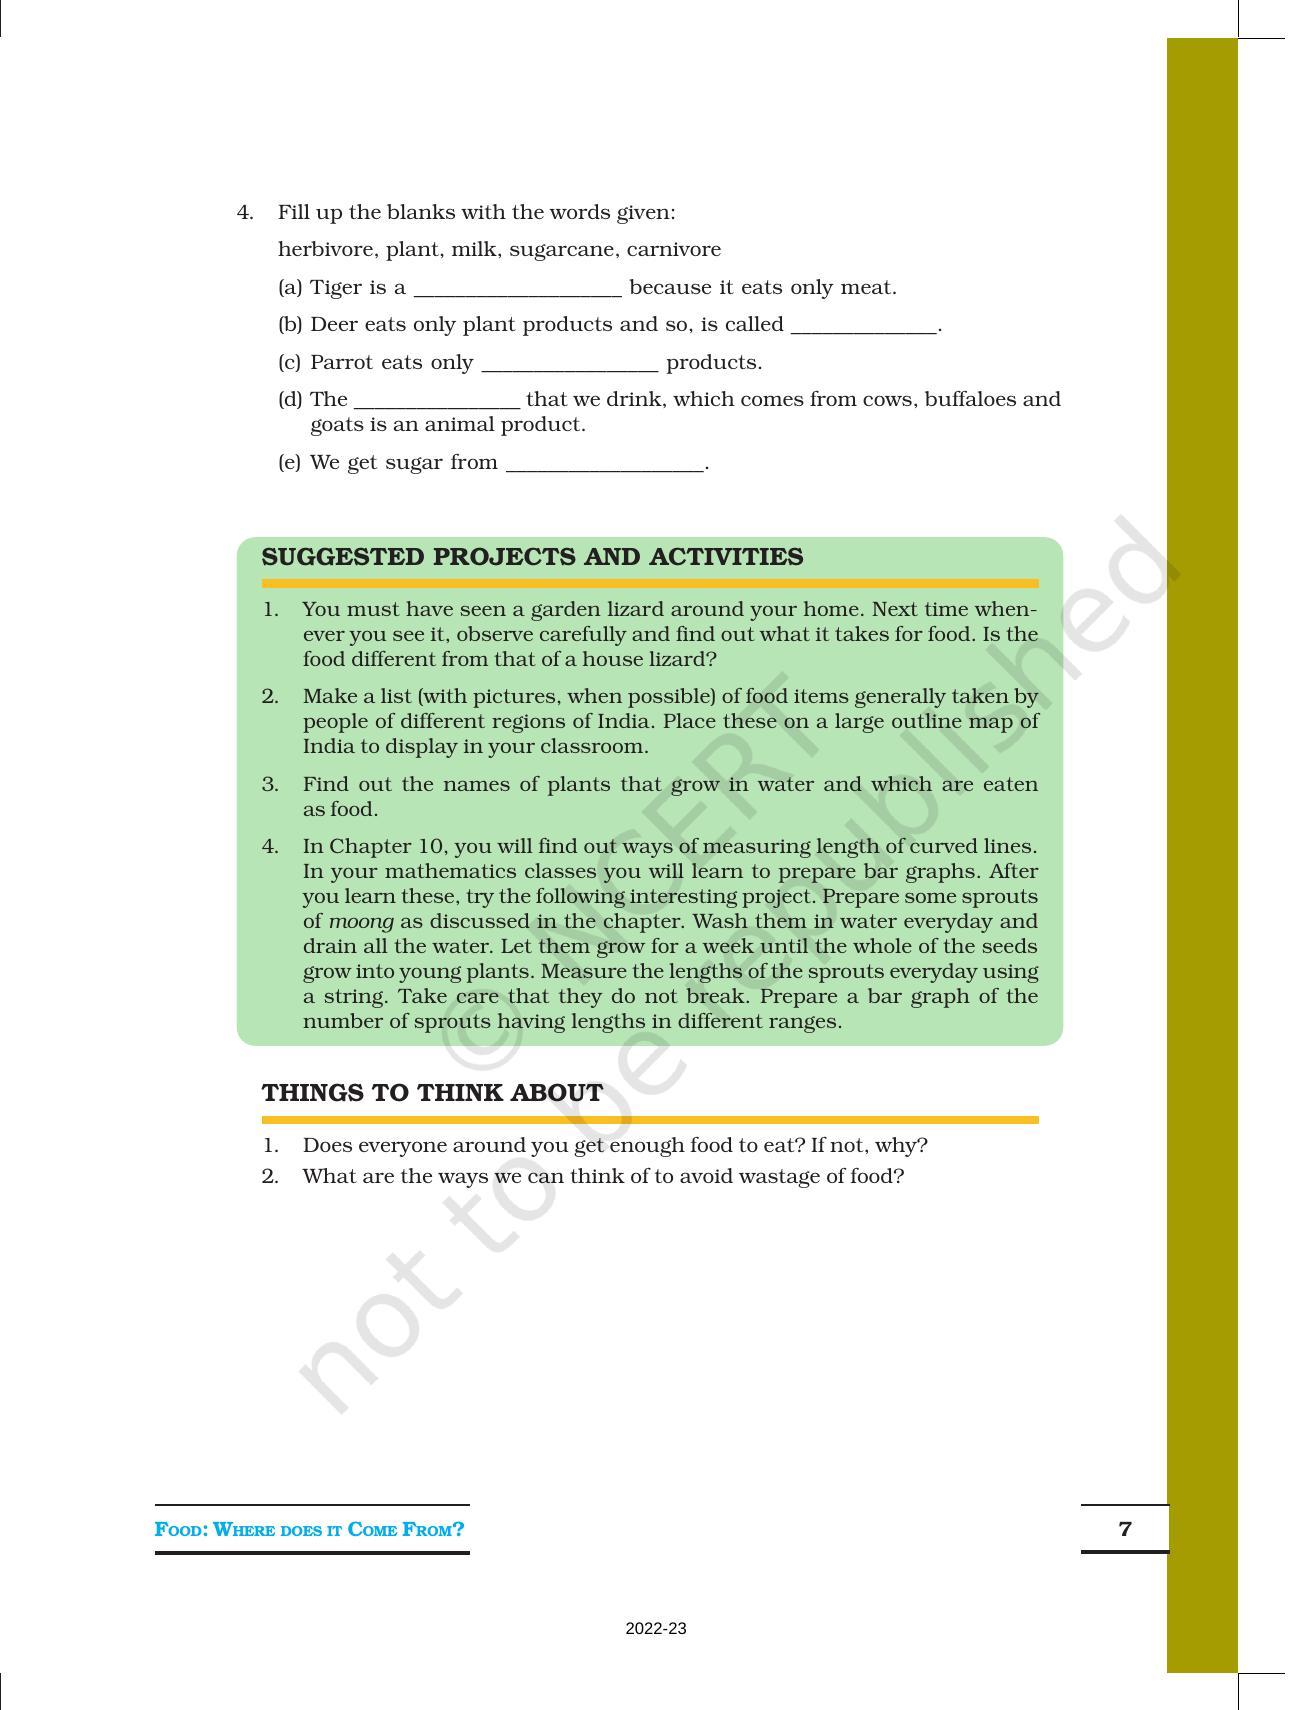 NCERT Book for Class 6 Science: Chapter 1-Food, Where Does It Come From? - Page 7